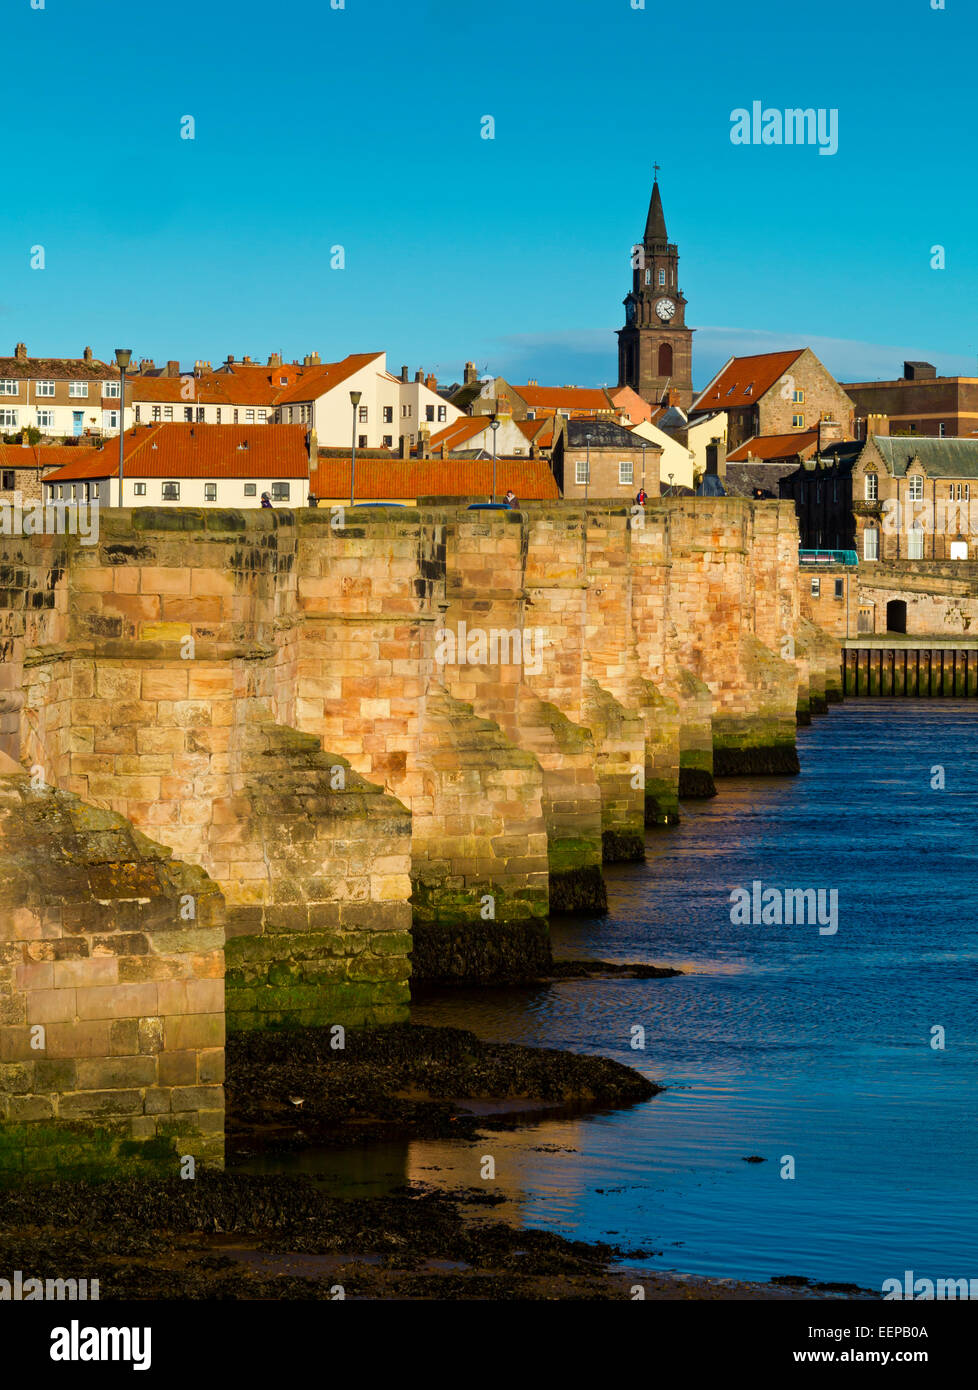 The Old Bridge at Berwick Upon Tweed Northumberland England UK built 1611 for James 1 of Scotland with the town visible behind Stock Photo